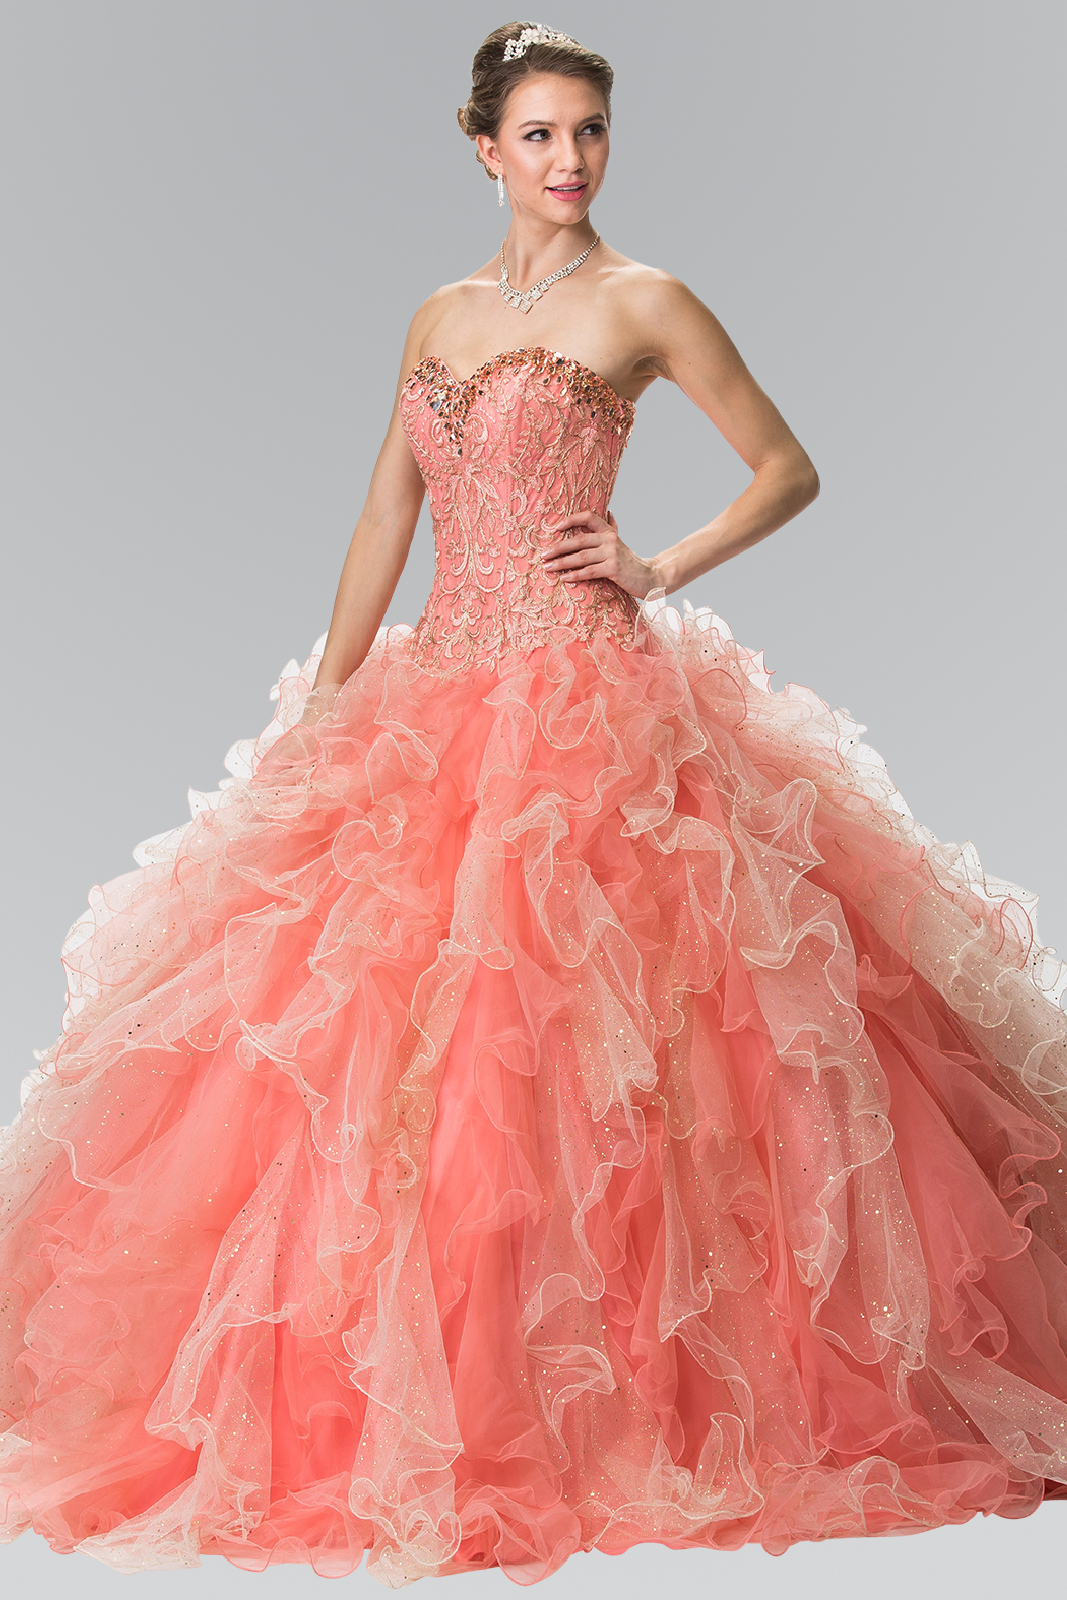 woman in coral champagne strapless dress